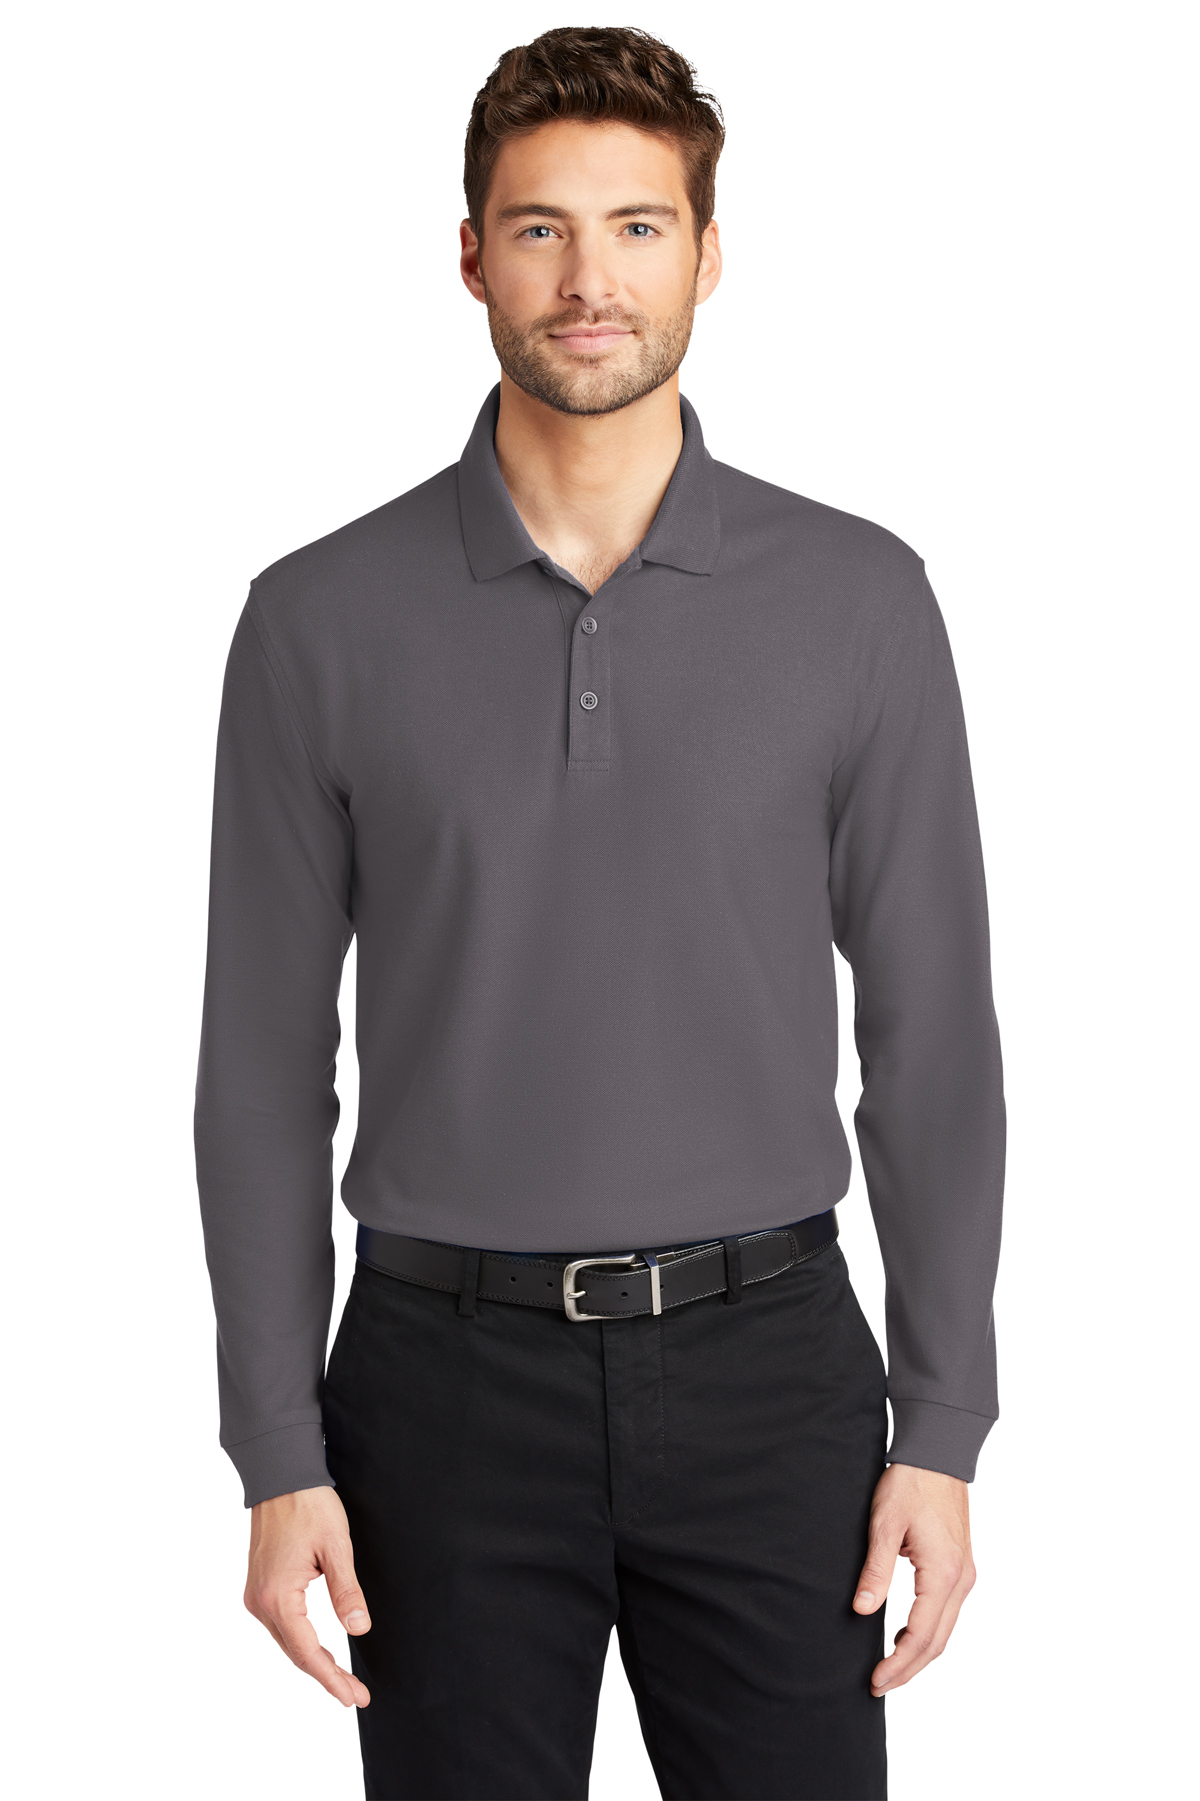 11120 Men's WearGuard® Short-Sleeve Piqué Polo With Pocket from Aramark